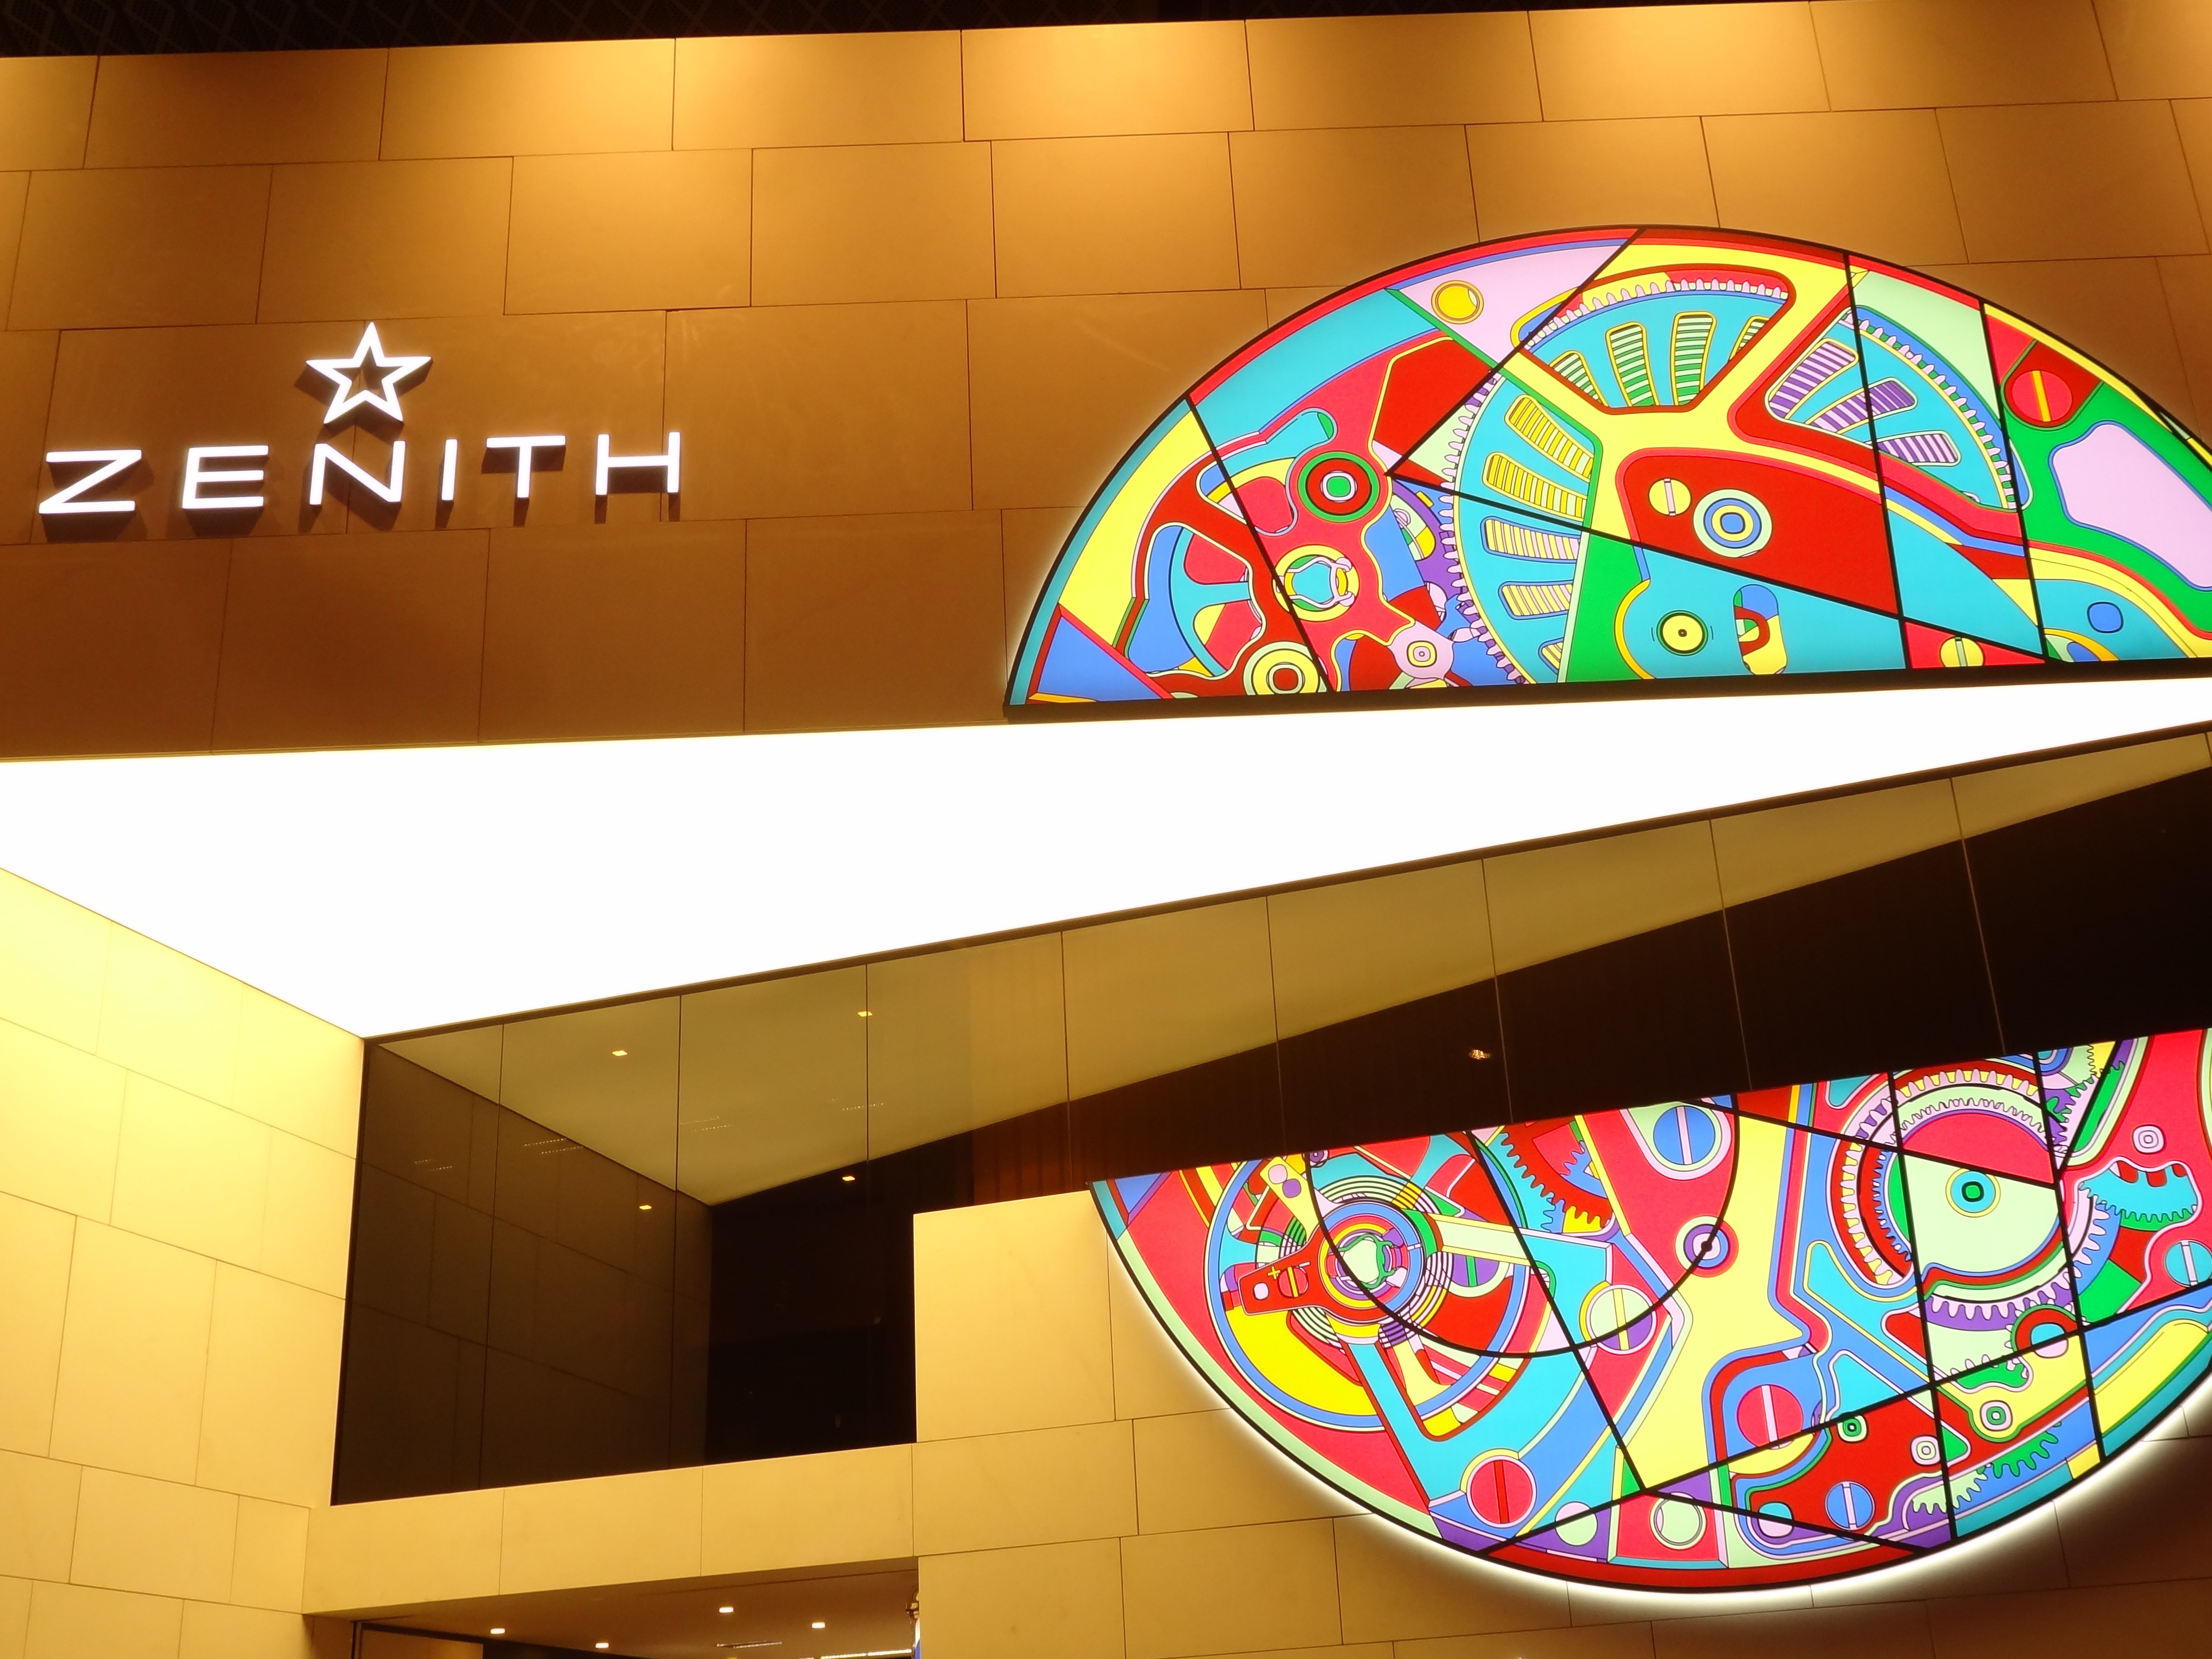 An innovative display by Zenith, staying true the style and artistic culture they bring to watchmaking. 